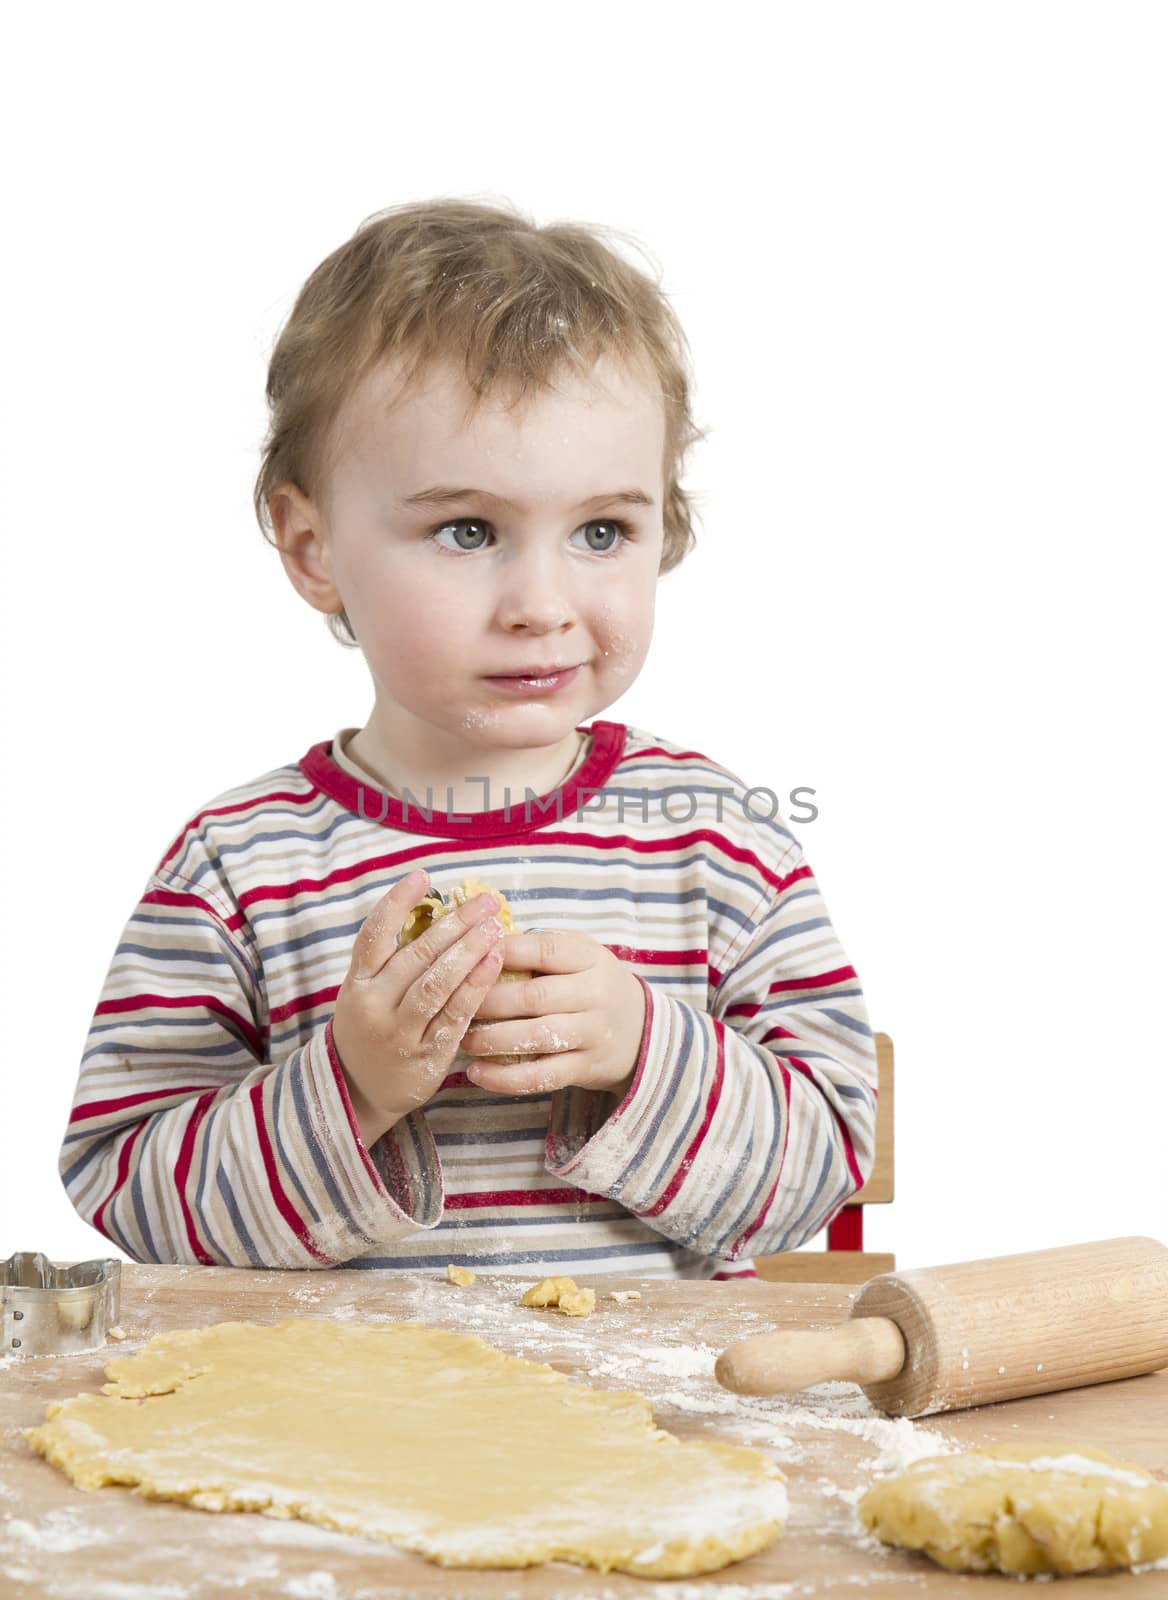 cute child with dough and rolling pin isolated on white background. horizontal image